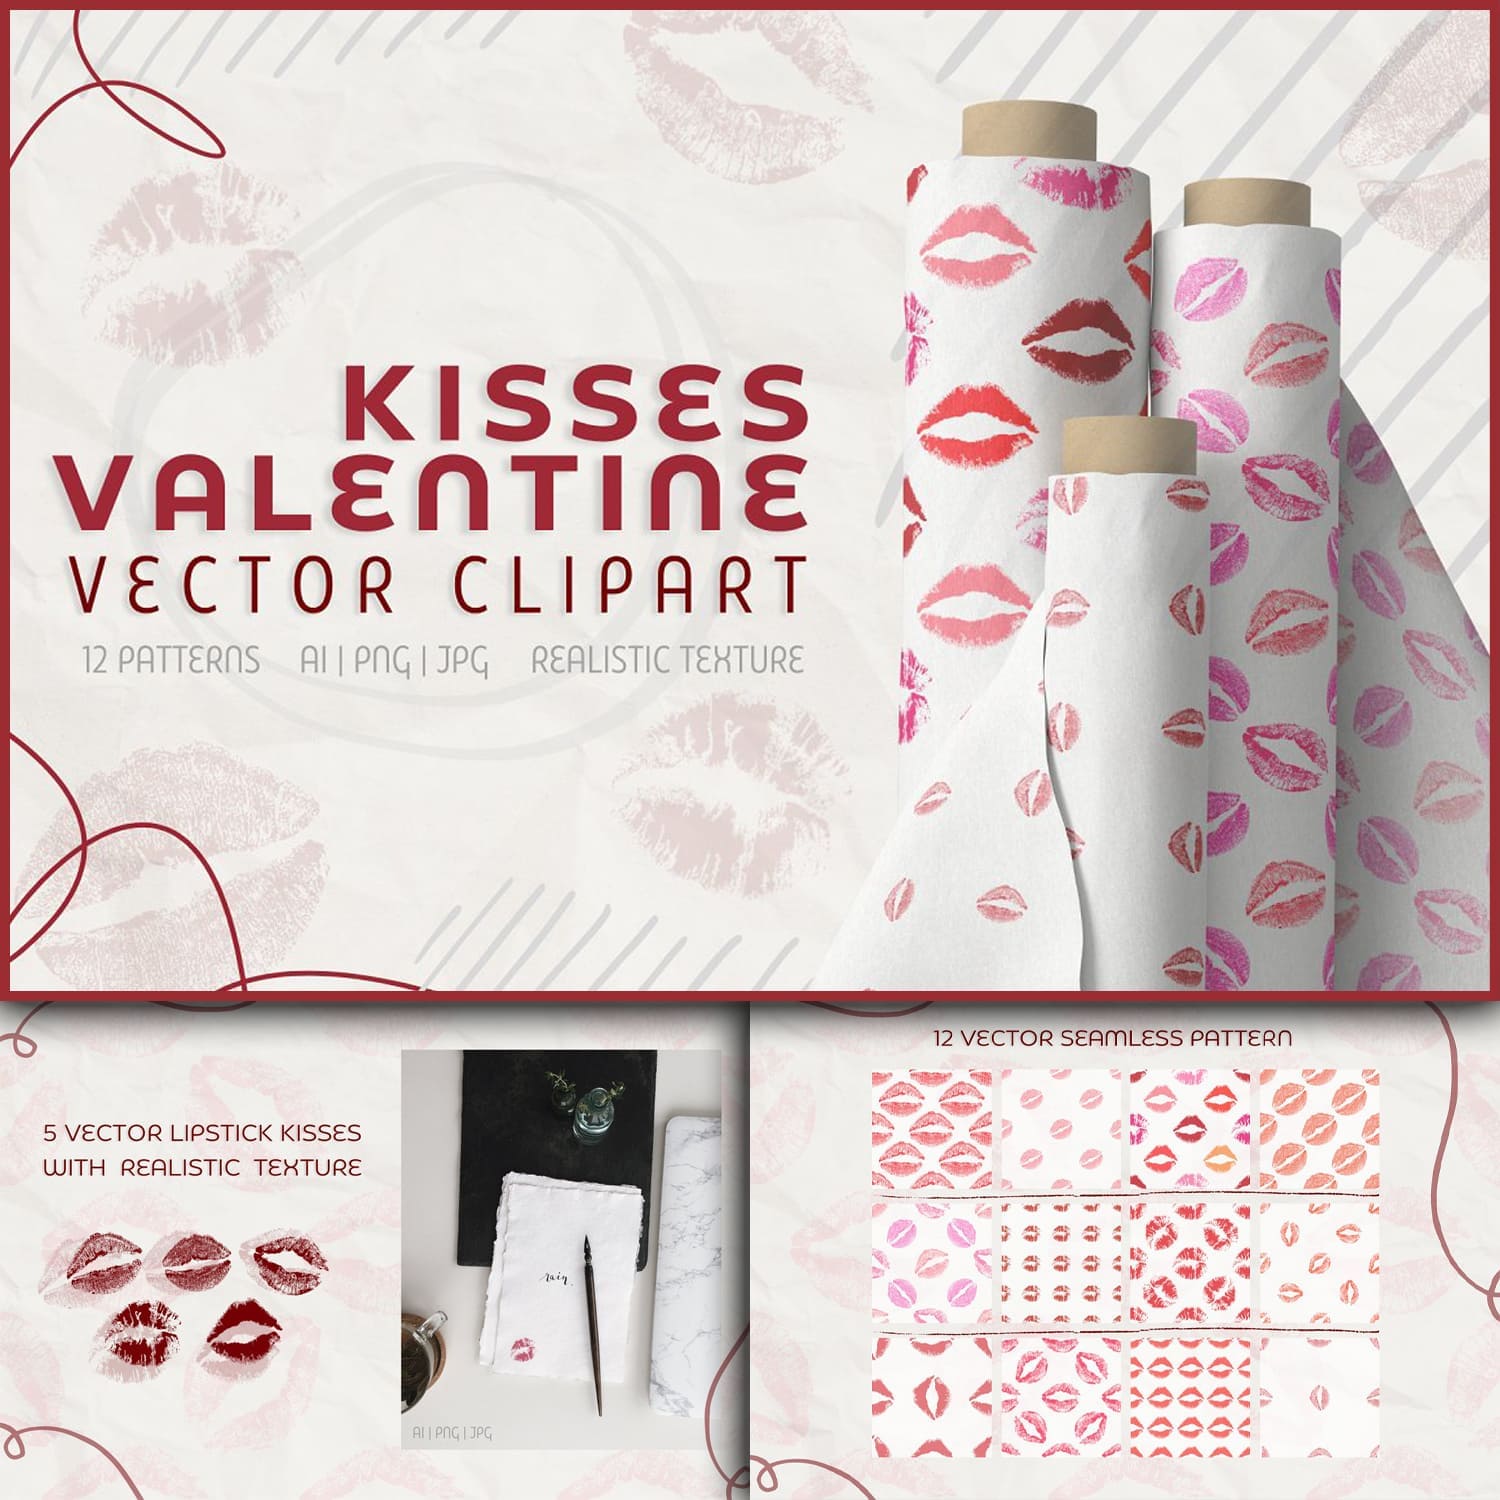 Kisses valentine vector clipart, first picture 1500x1500.